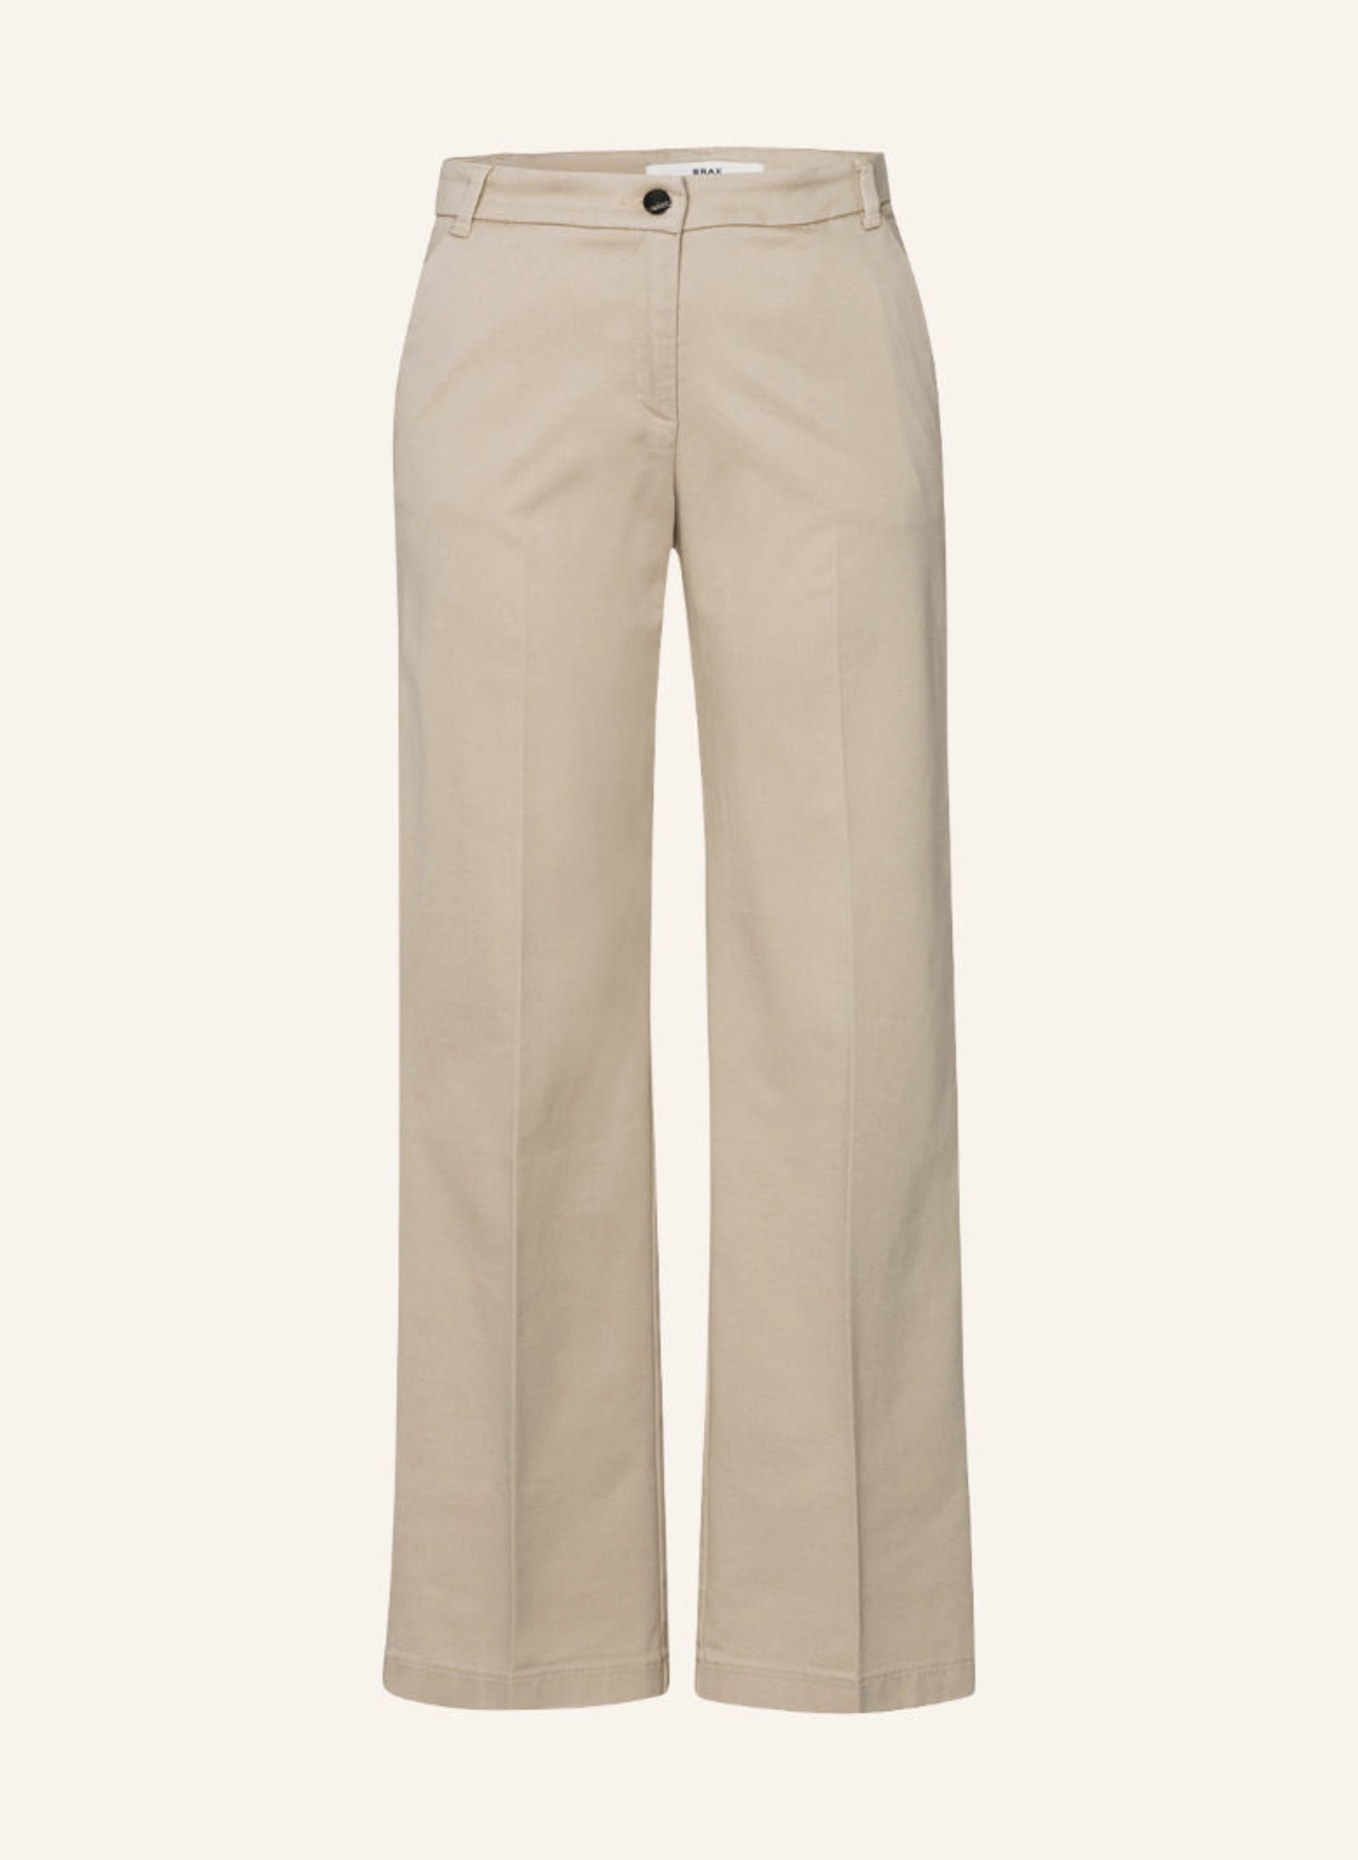 Palazzohose STYLE in beige MAINE BRAX